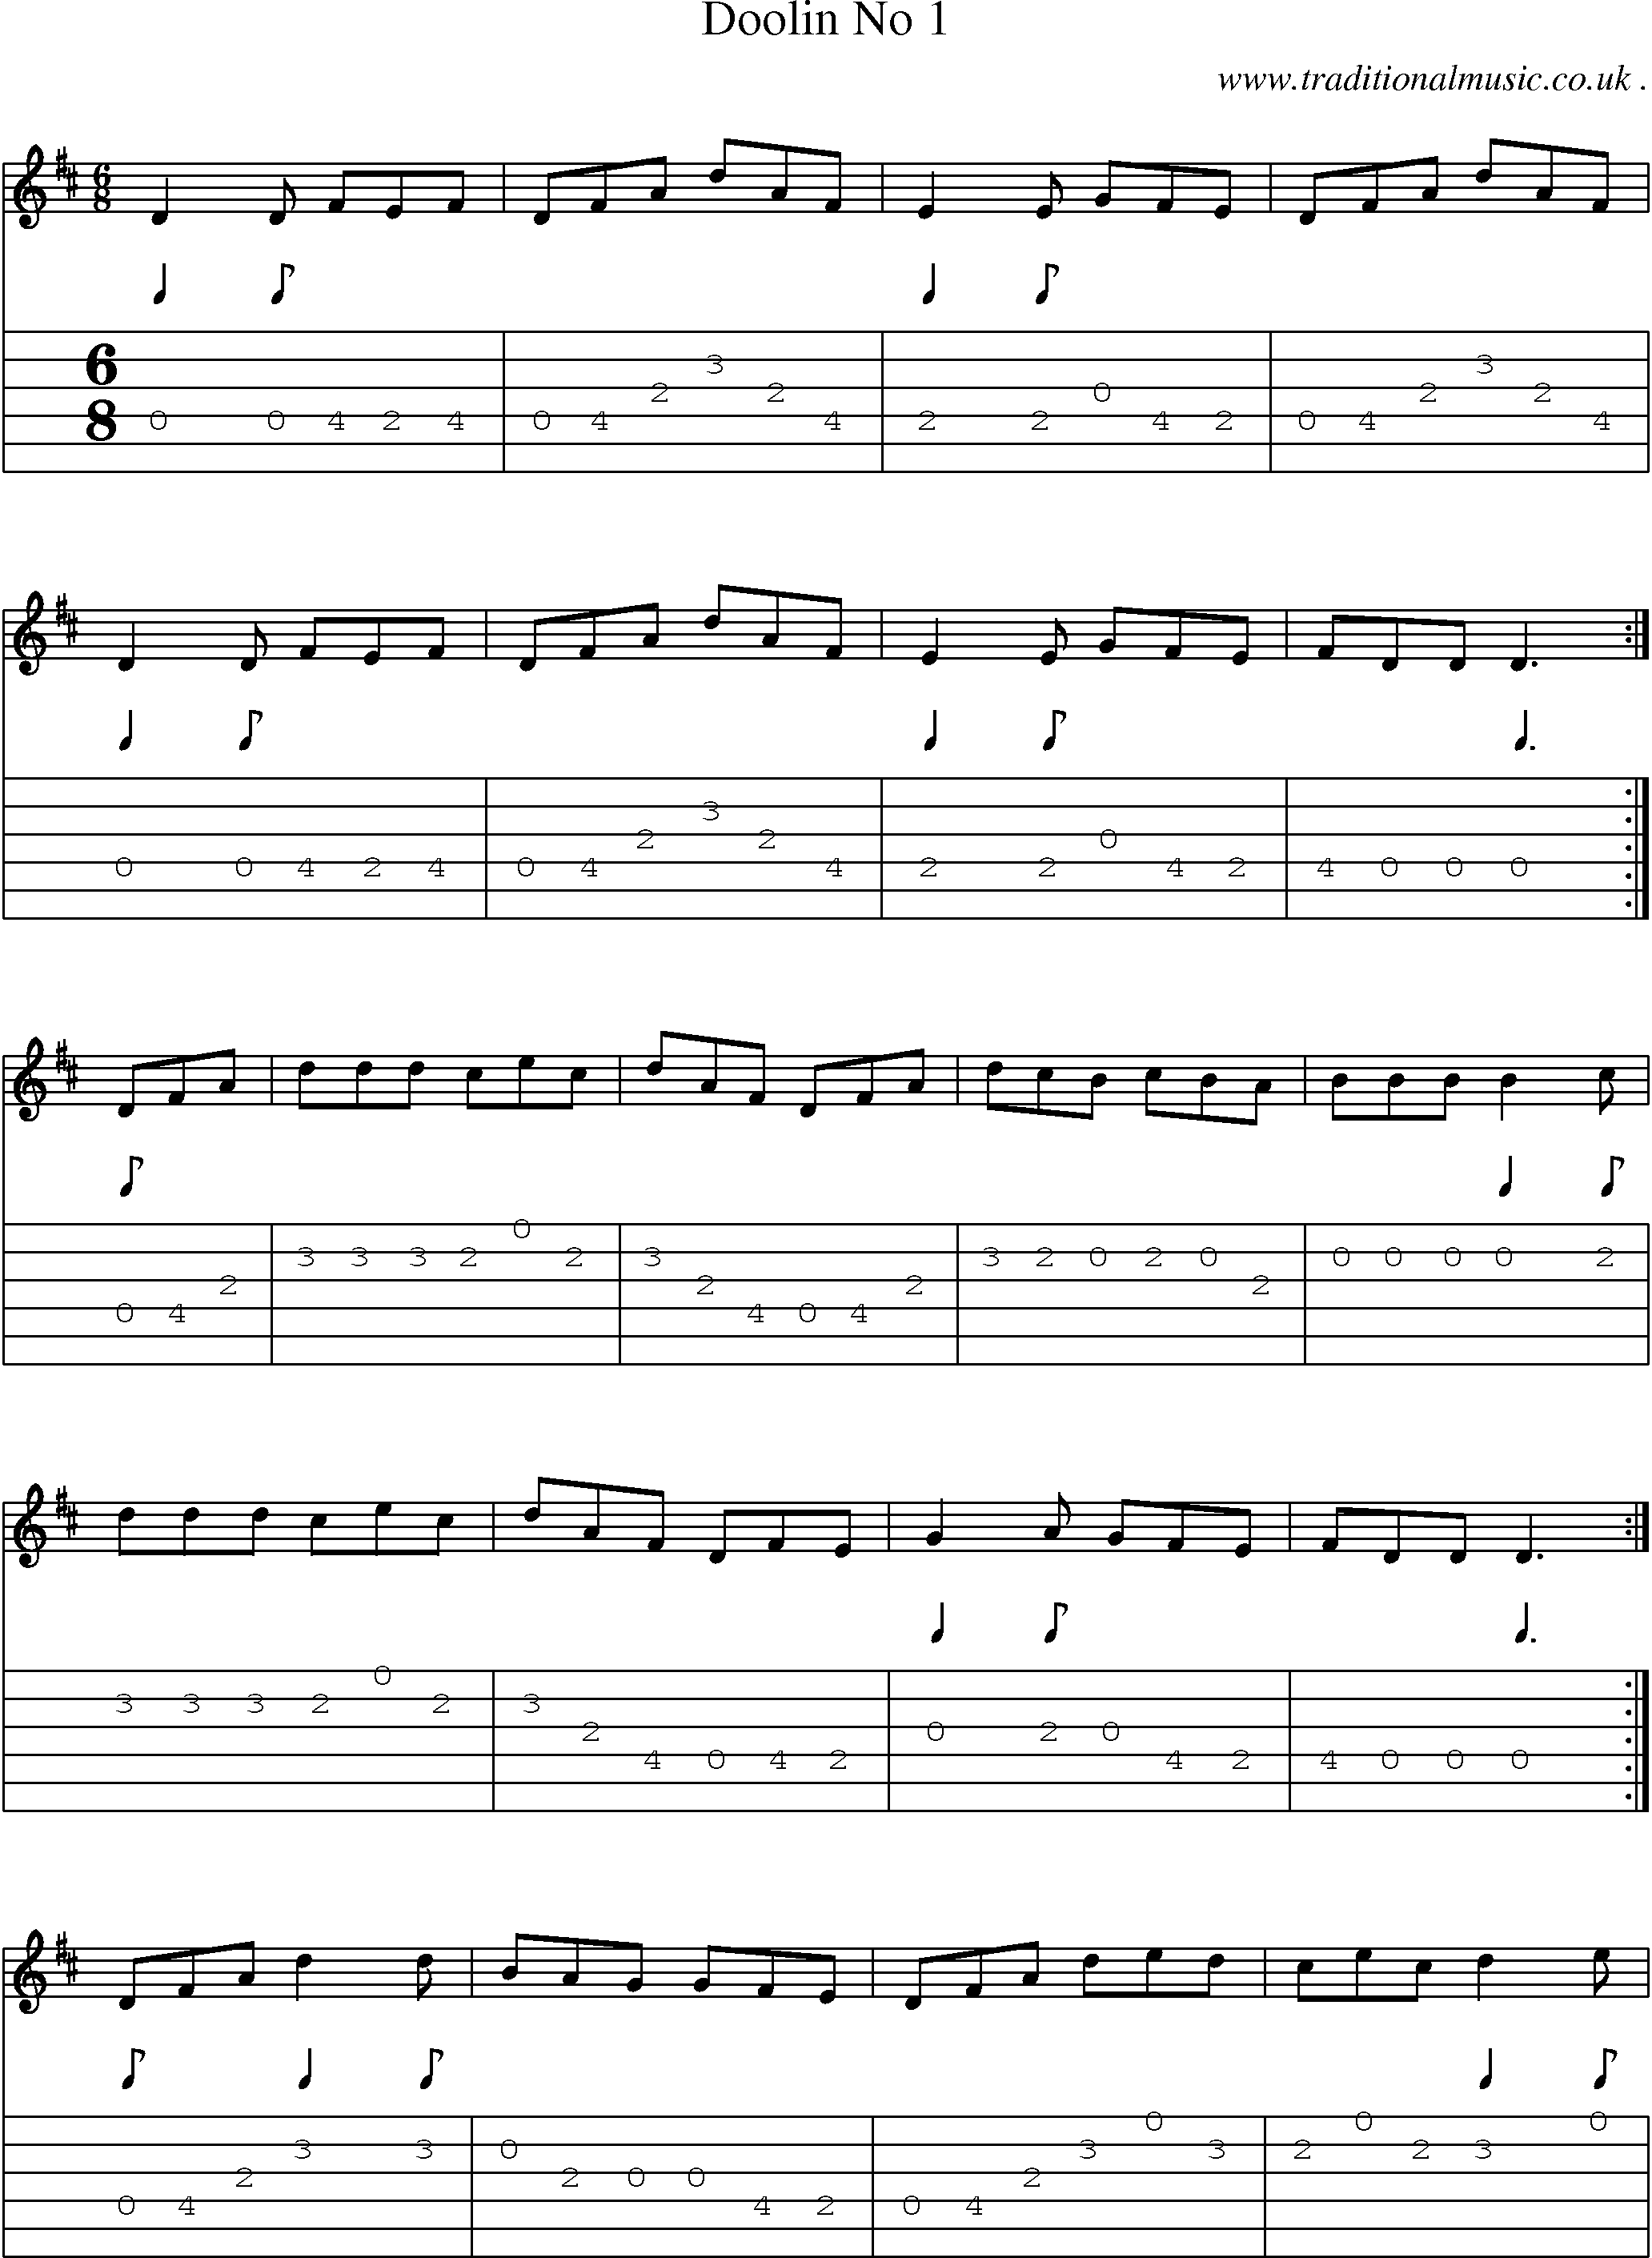 Sheet-Music and Guitar Tabs for Doolin No 1